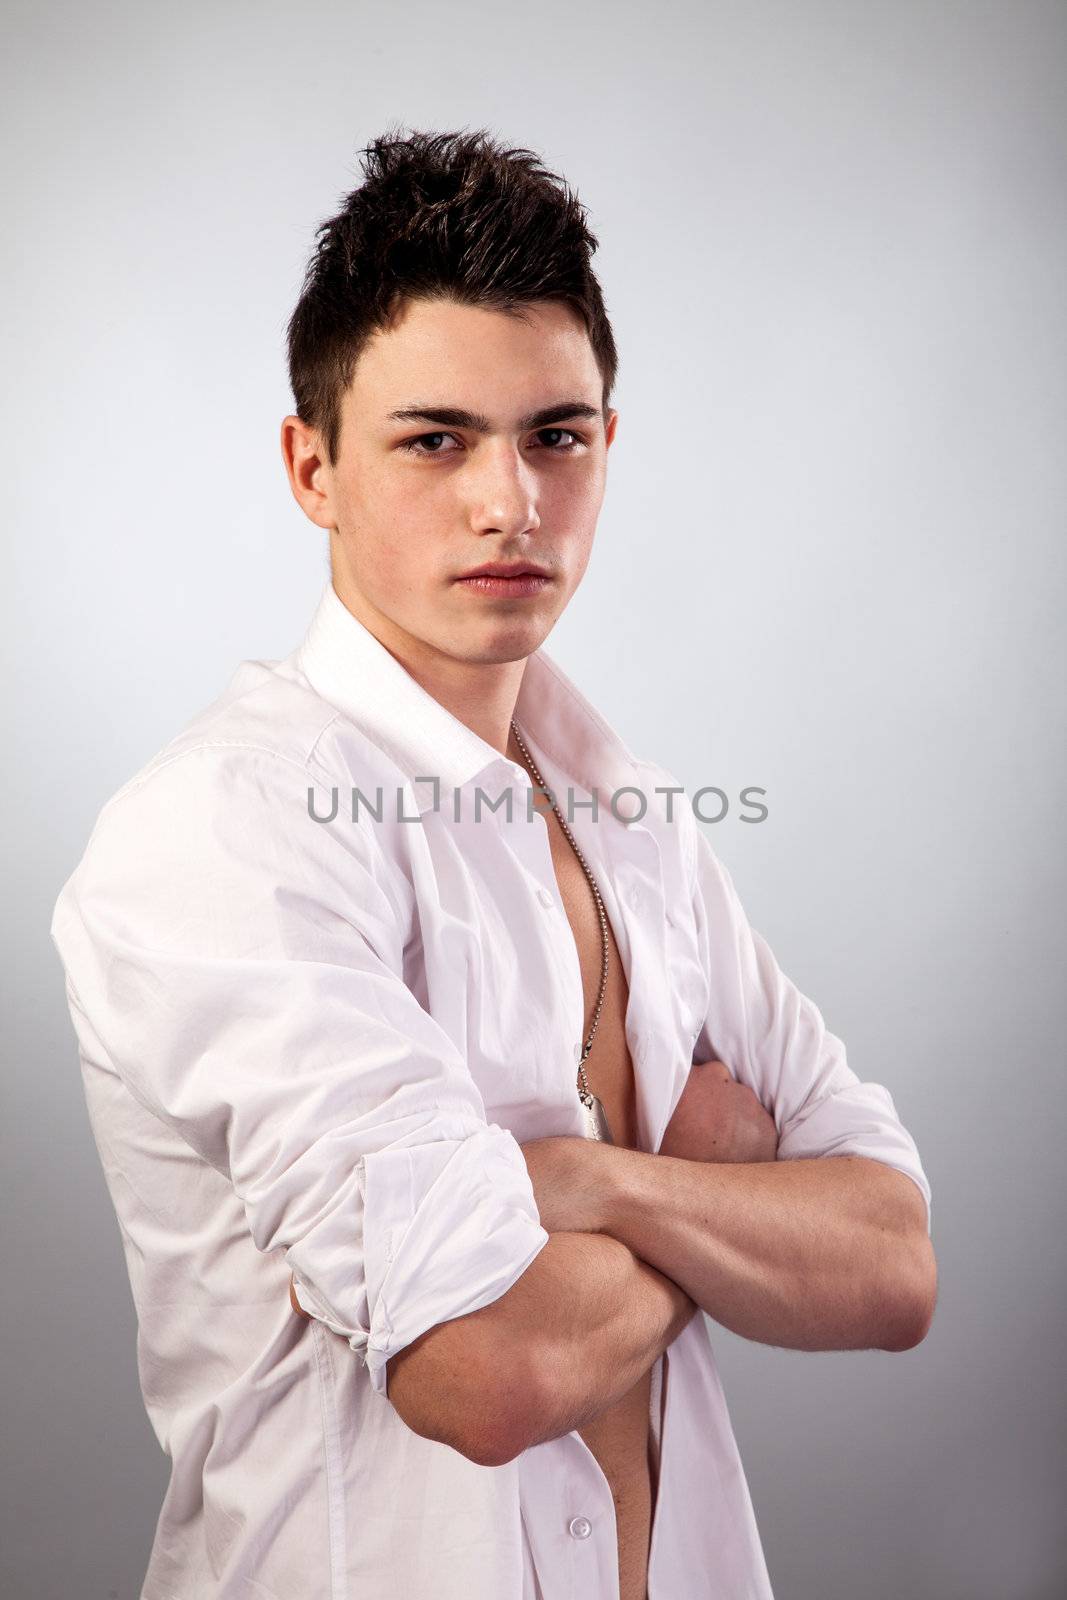 Healthy muscular young man. Isolated on grey background.